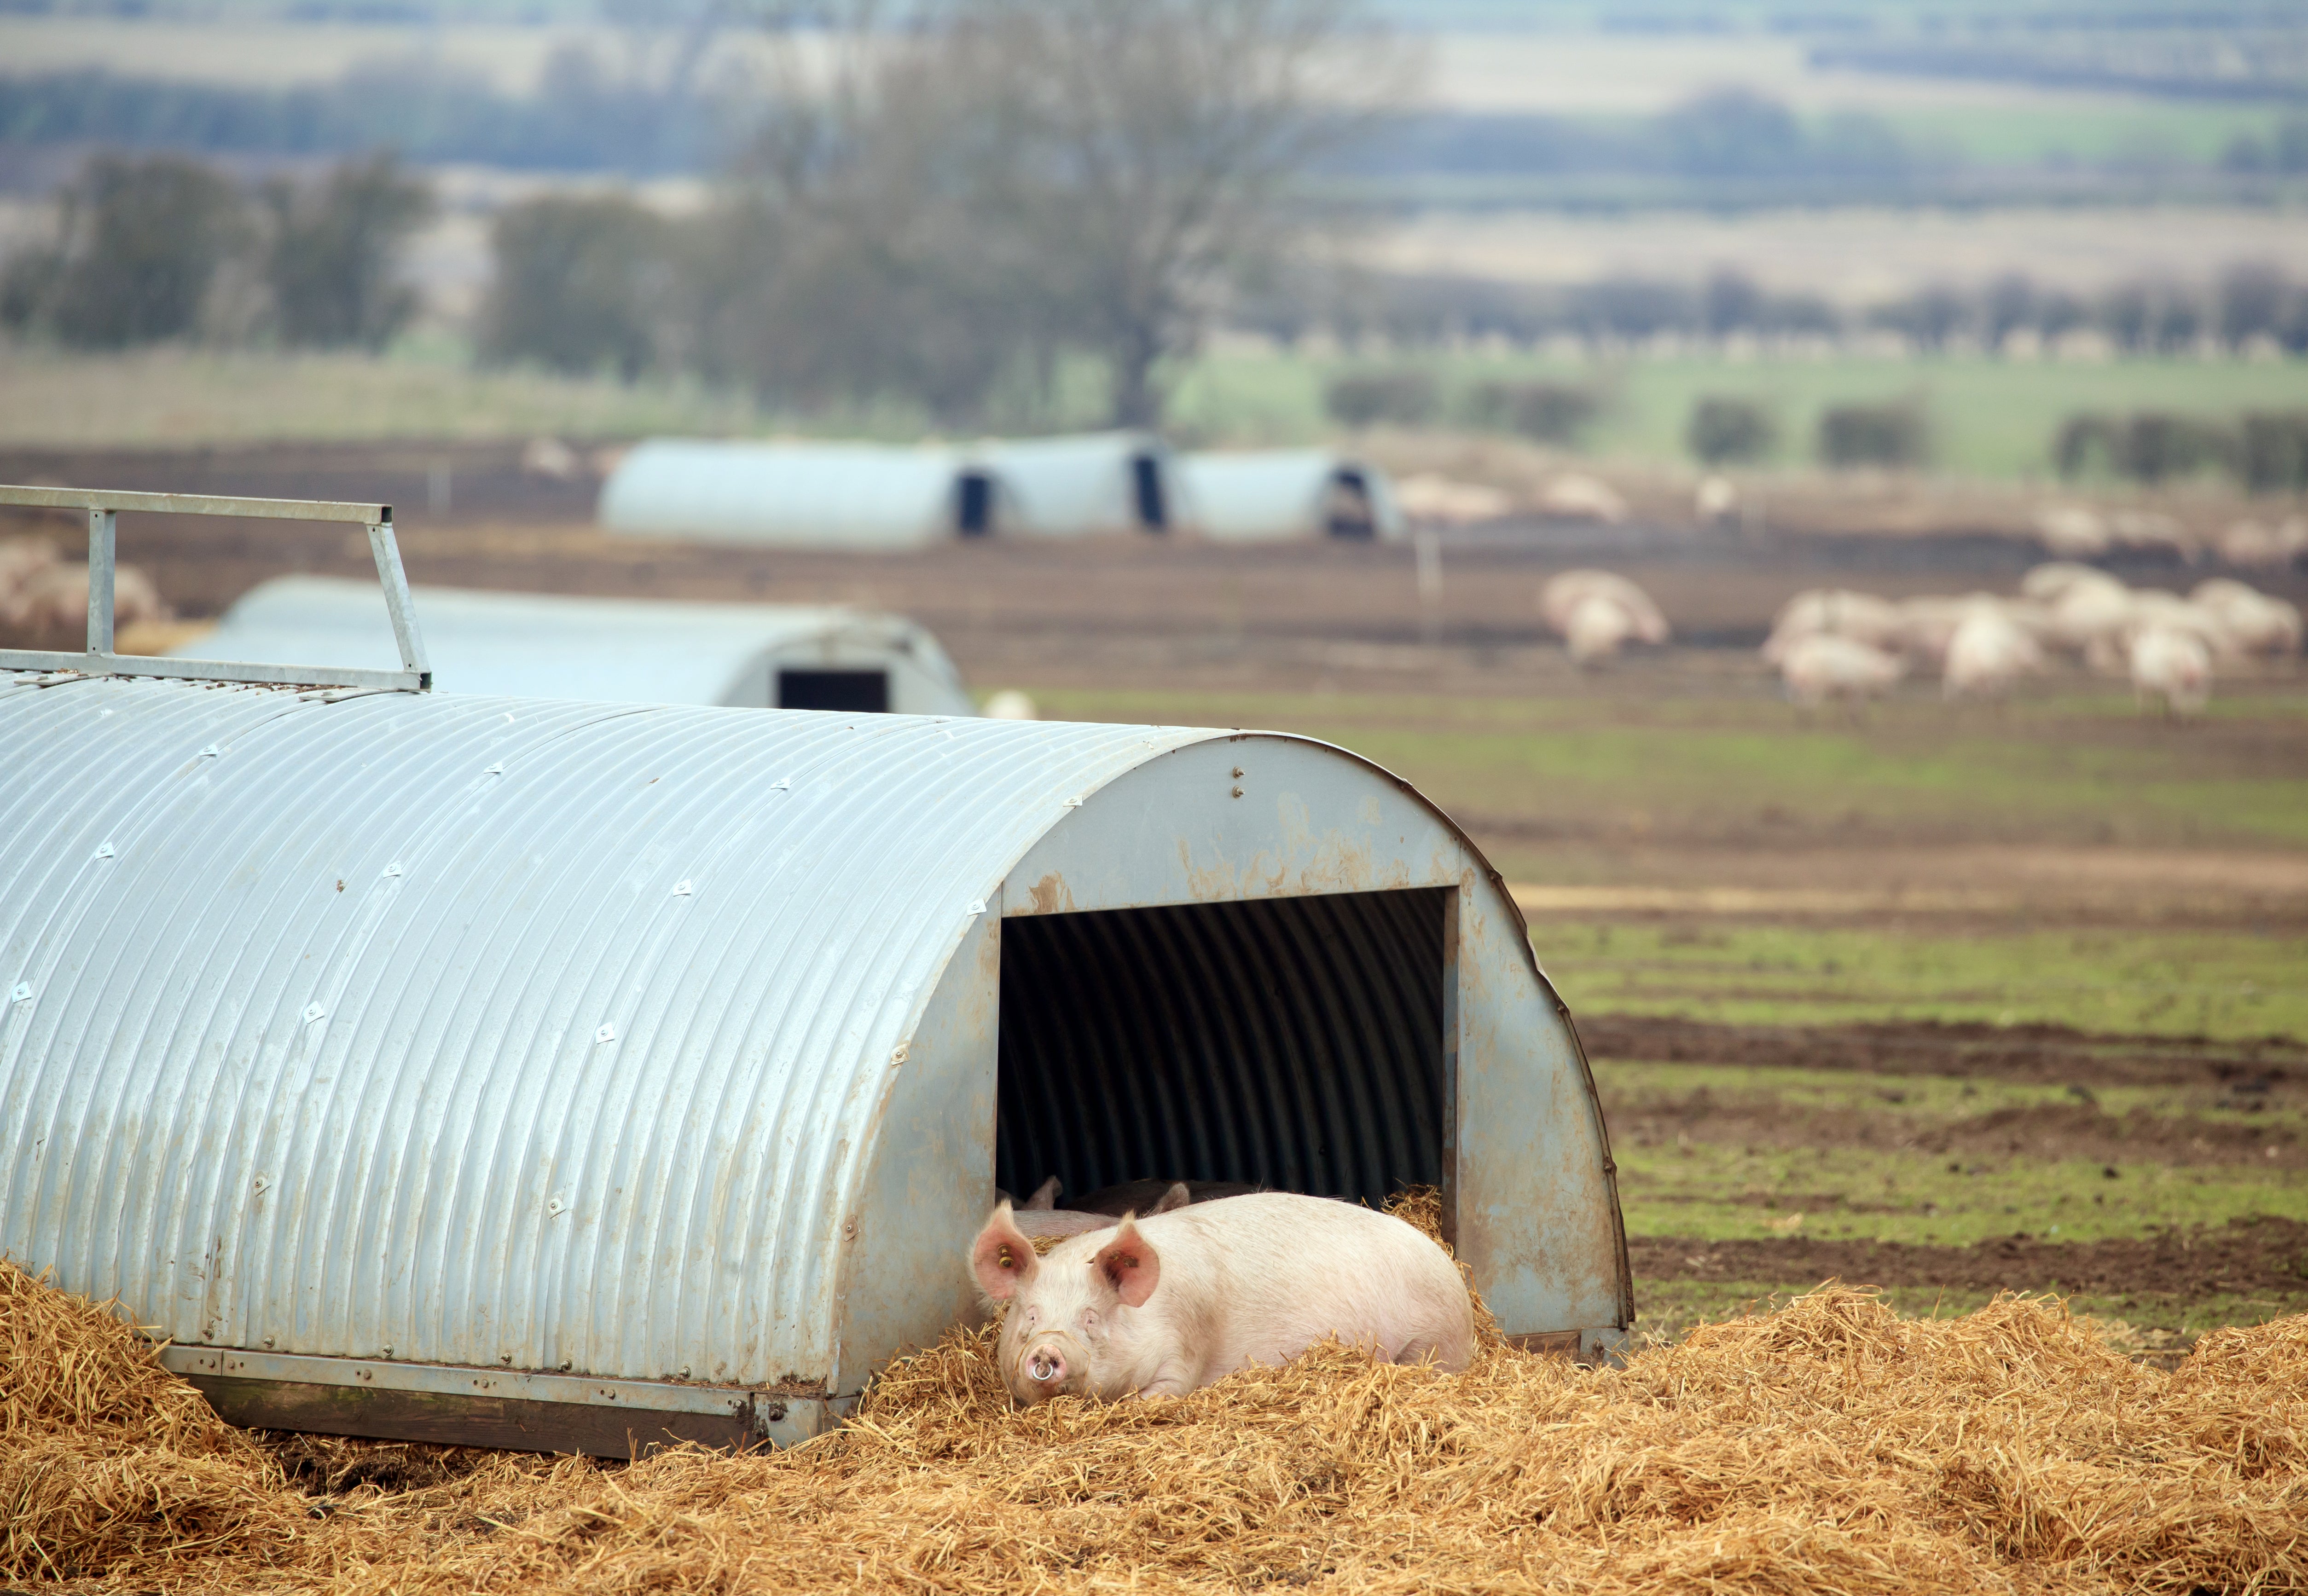 A pig on a farm in North Yorkshire (Danny Lawson/PA)